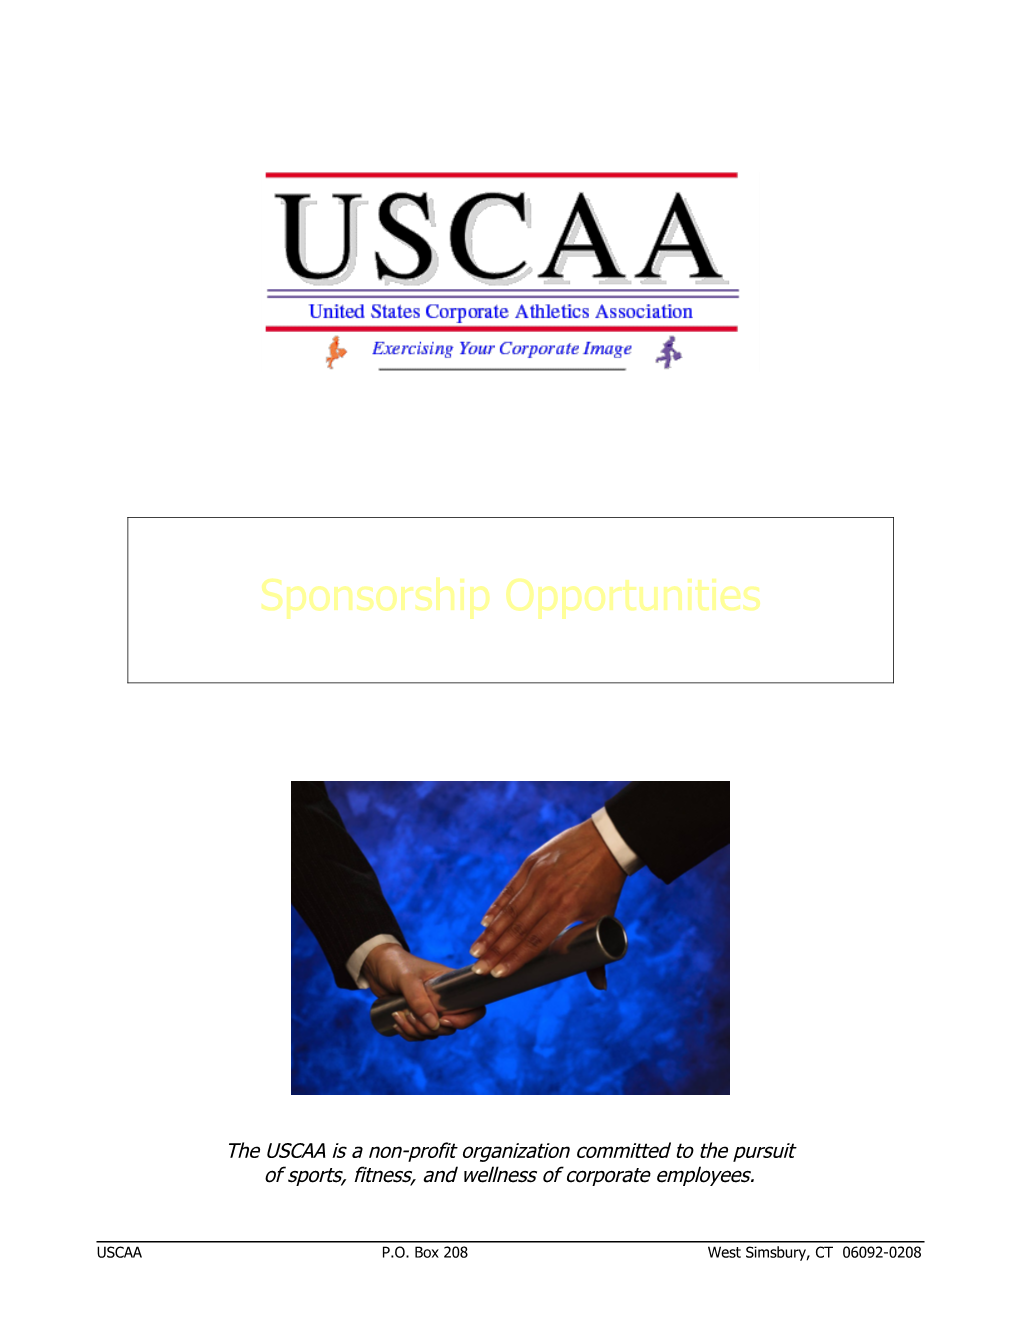 USCAA National Track & Field Agreement